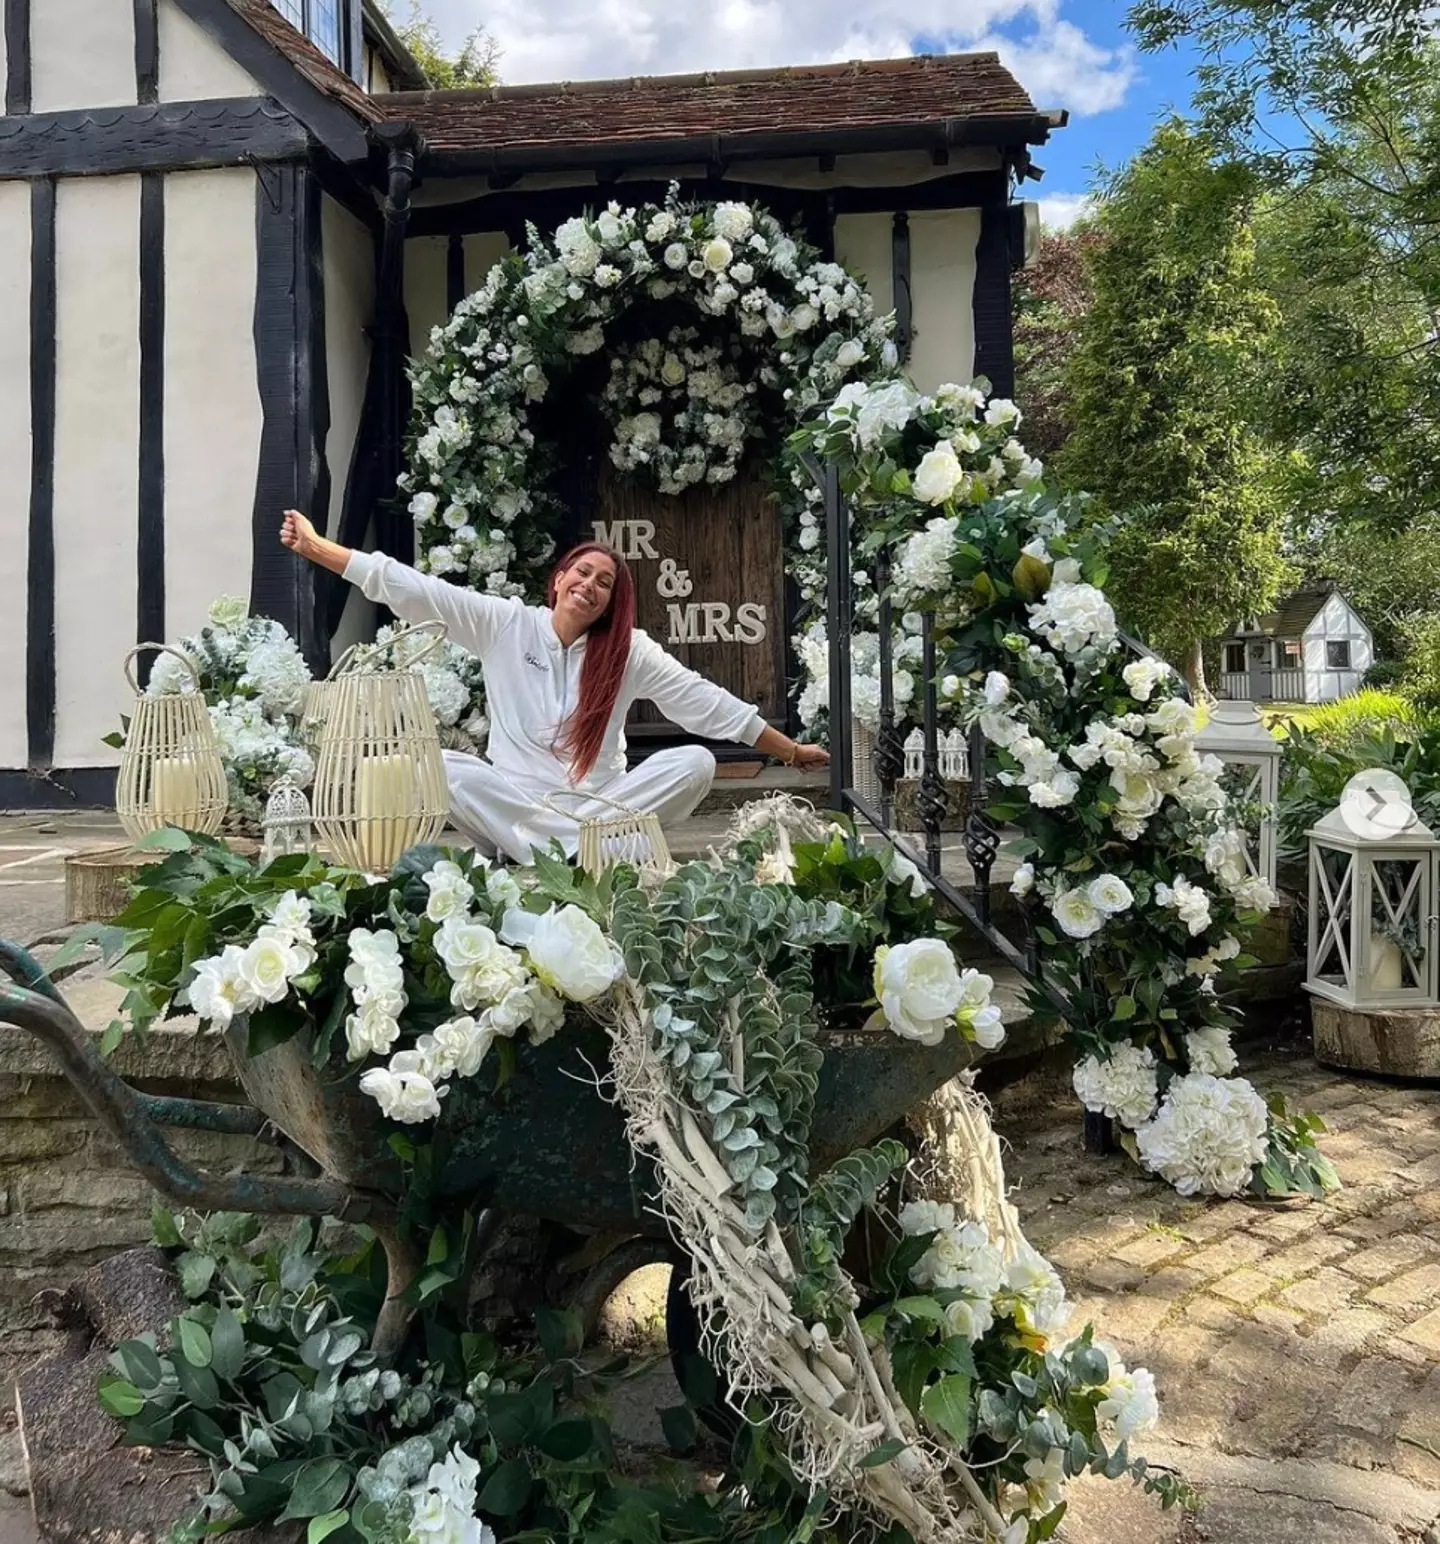 The Instagram influencer organised a special wedding-themed front door at Pickle Cottage.